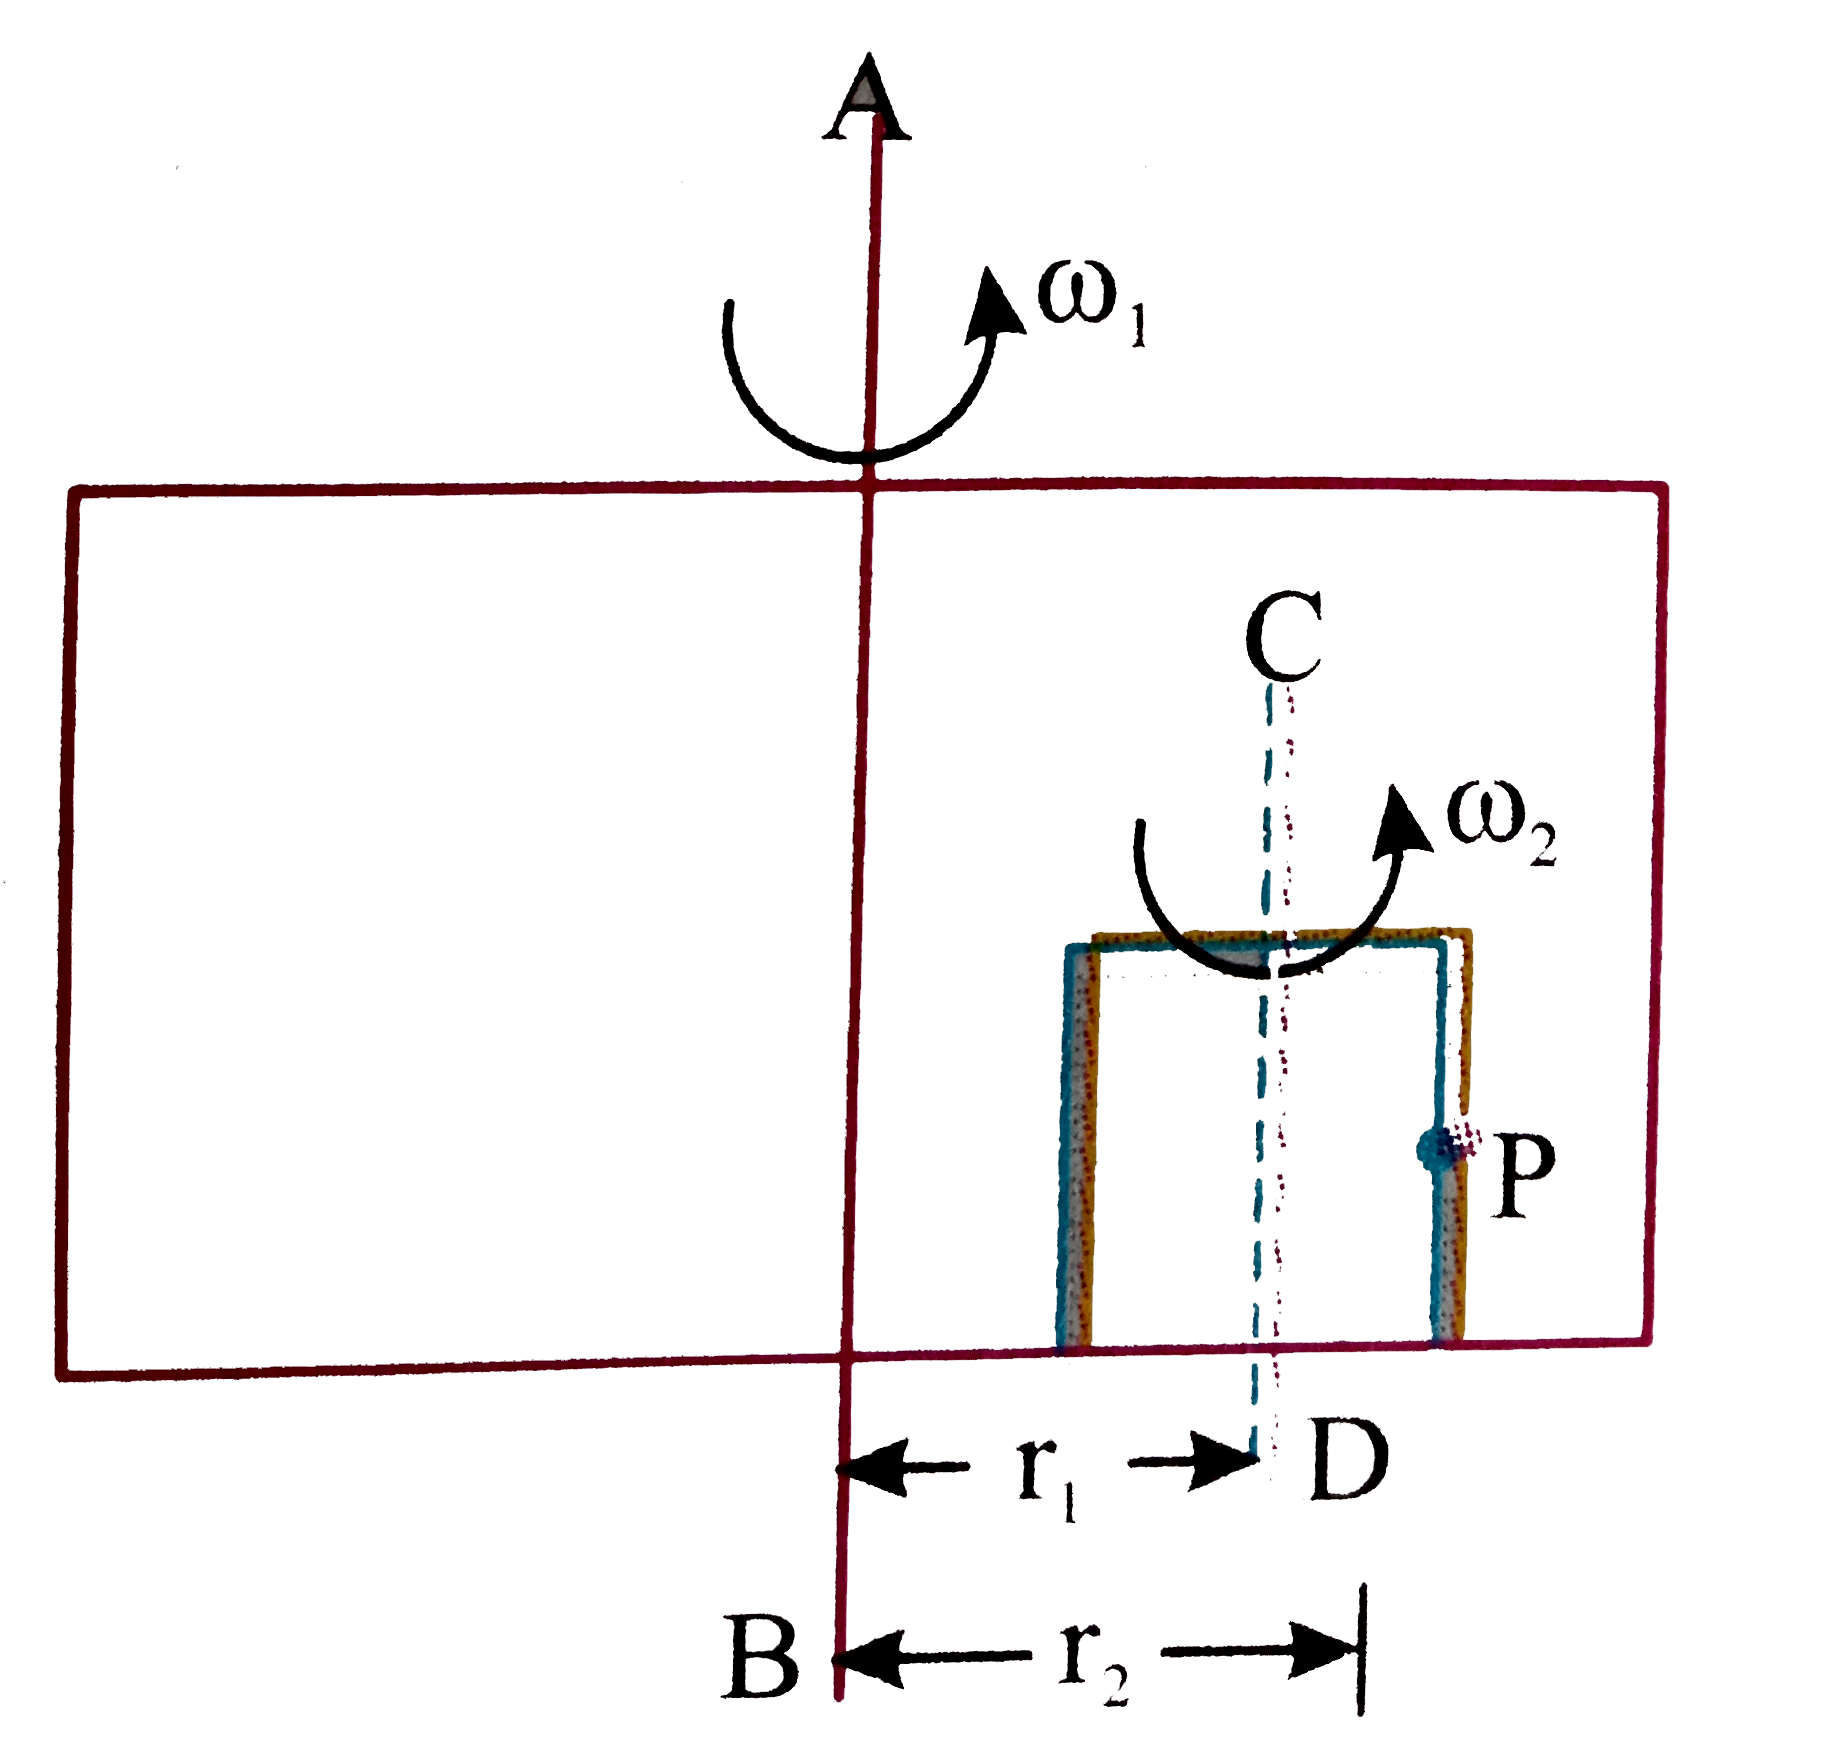 A large rectangular box has been rotated with a constant angular velocity omega(1) about its axis as shown in the figure. Another small box kept inside the bigger box is rotated in the same sense with angular velocity omega(2) about its axis (which is fixed to floor of bigger box). A particle P has been identified, its angular velocity about AB would be